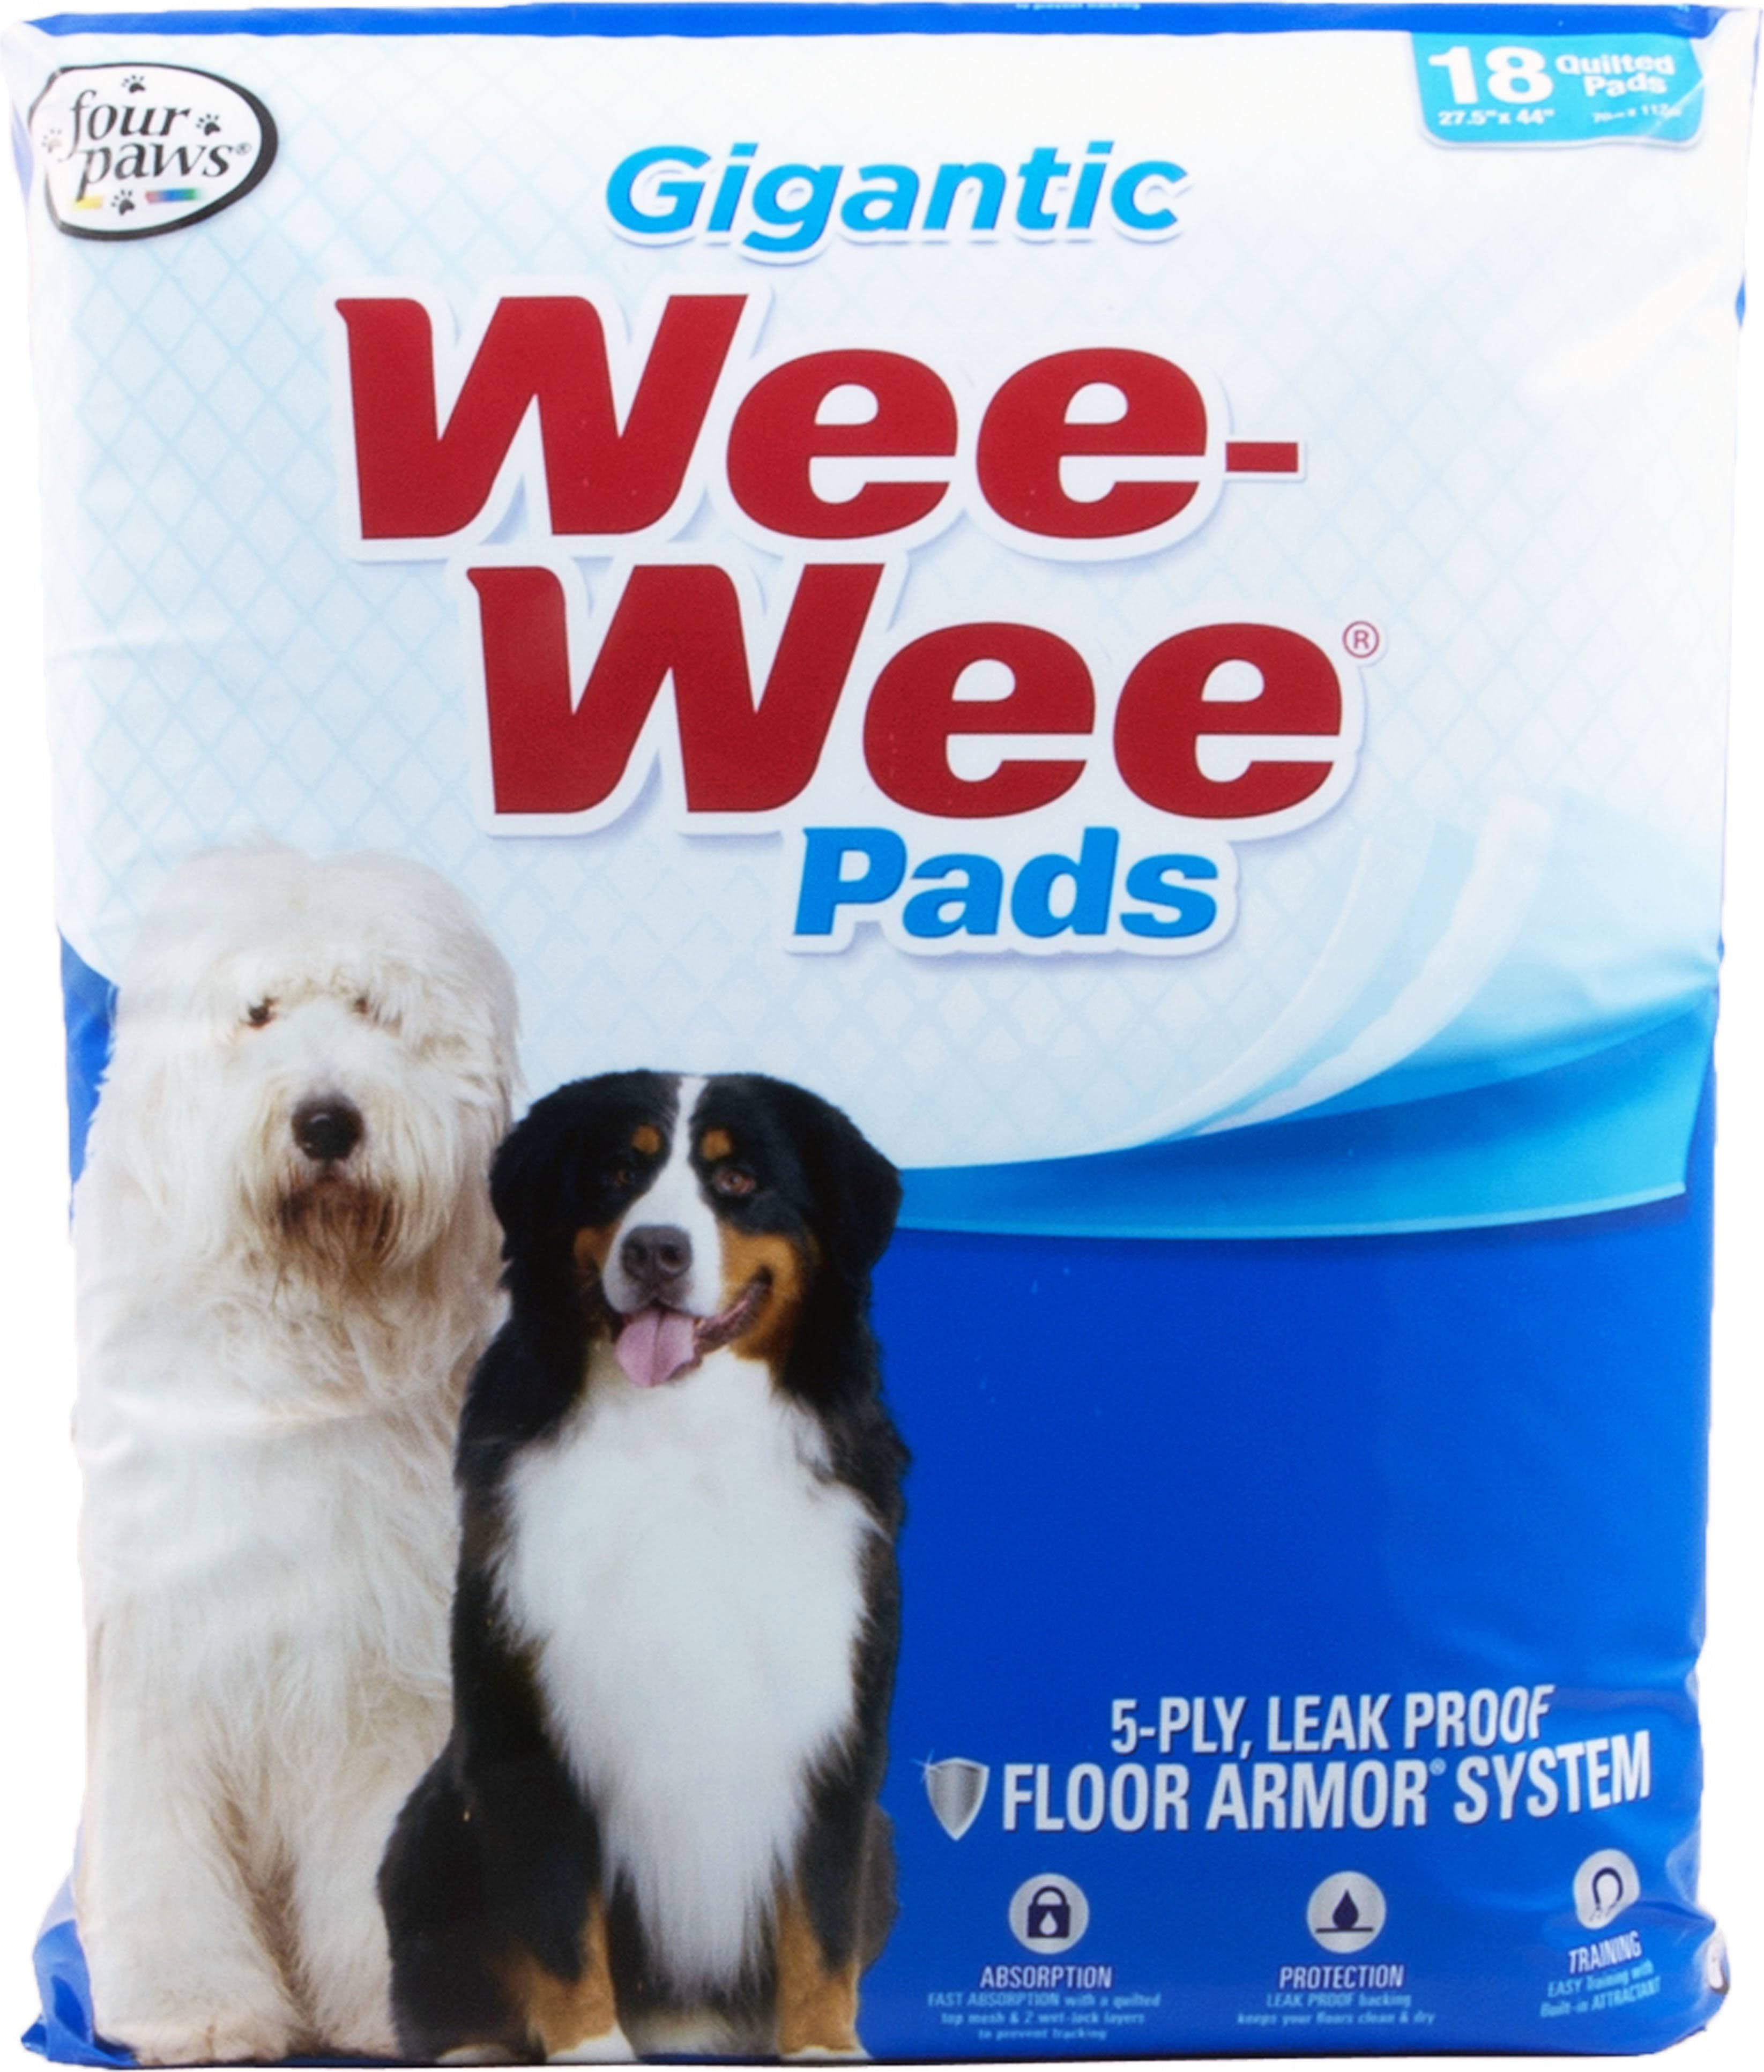 Four Paws Gigantic Wee-Wee Pads - 18 Pads